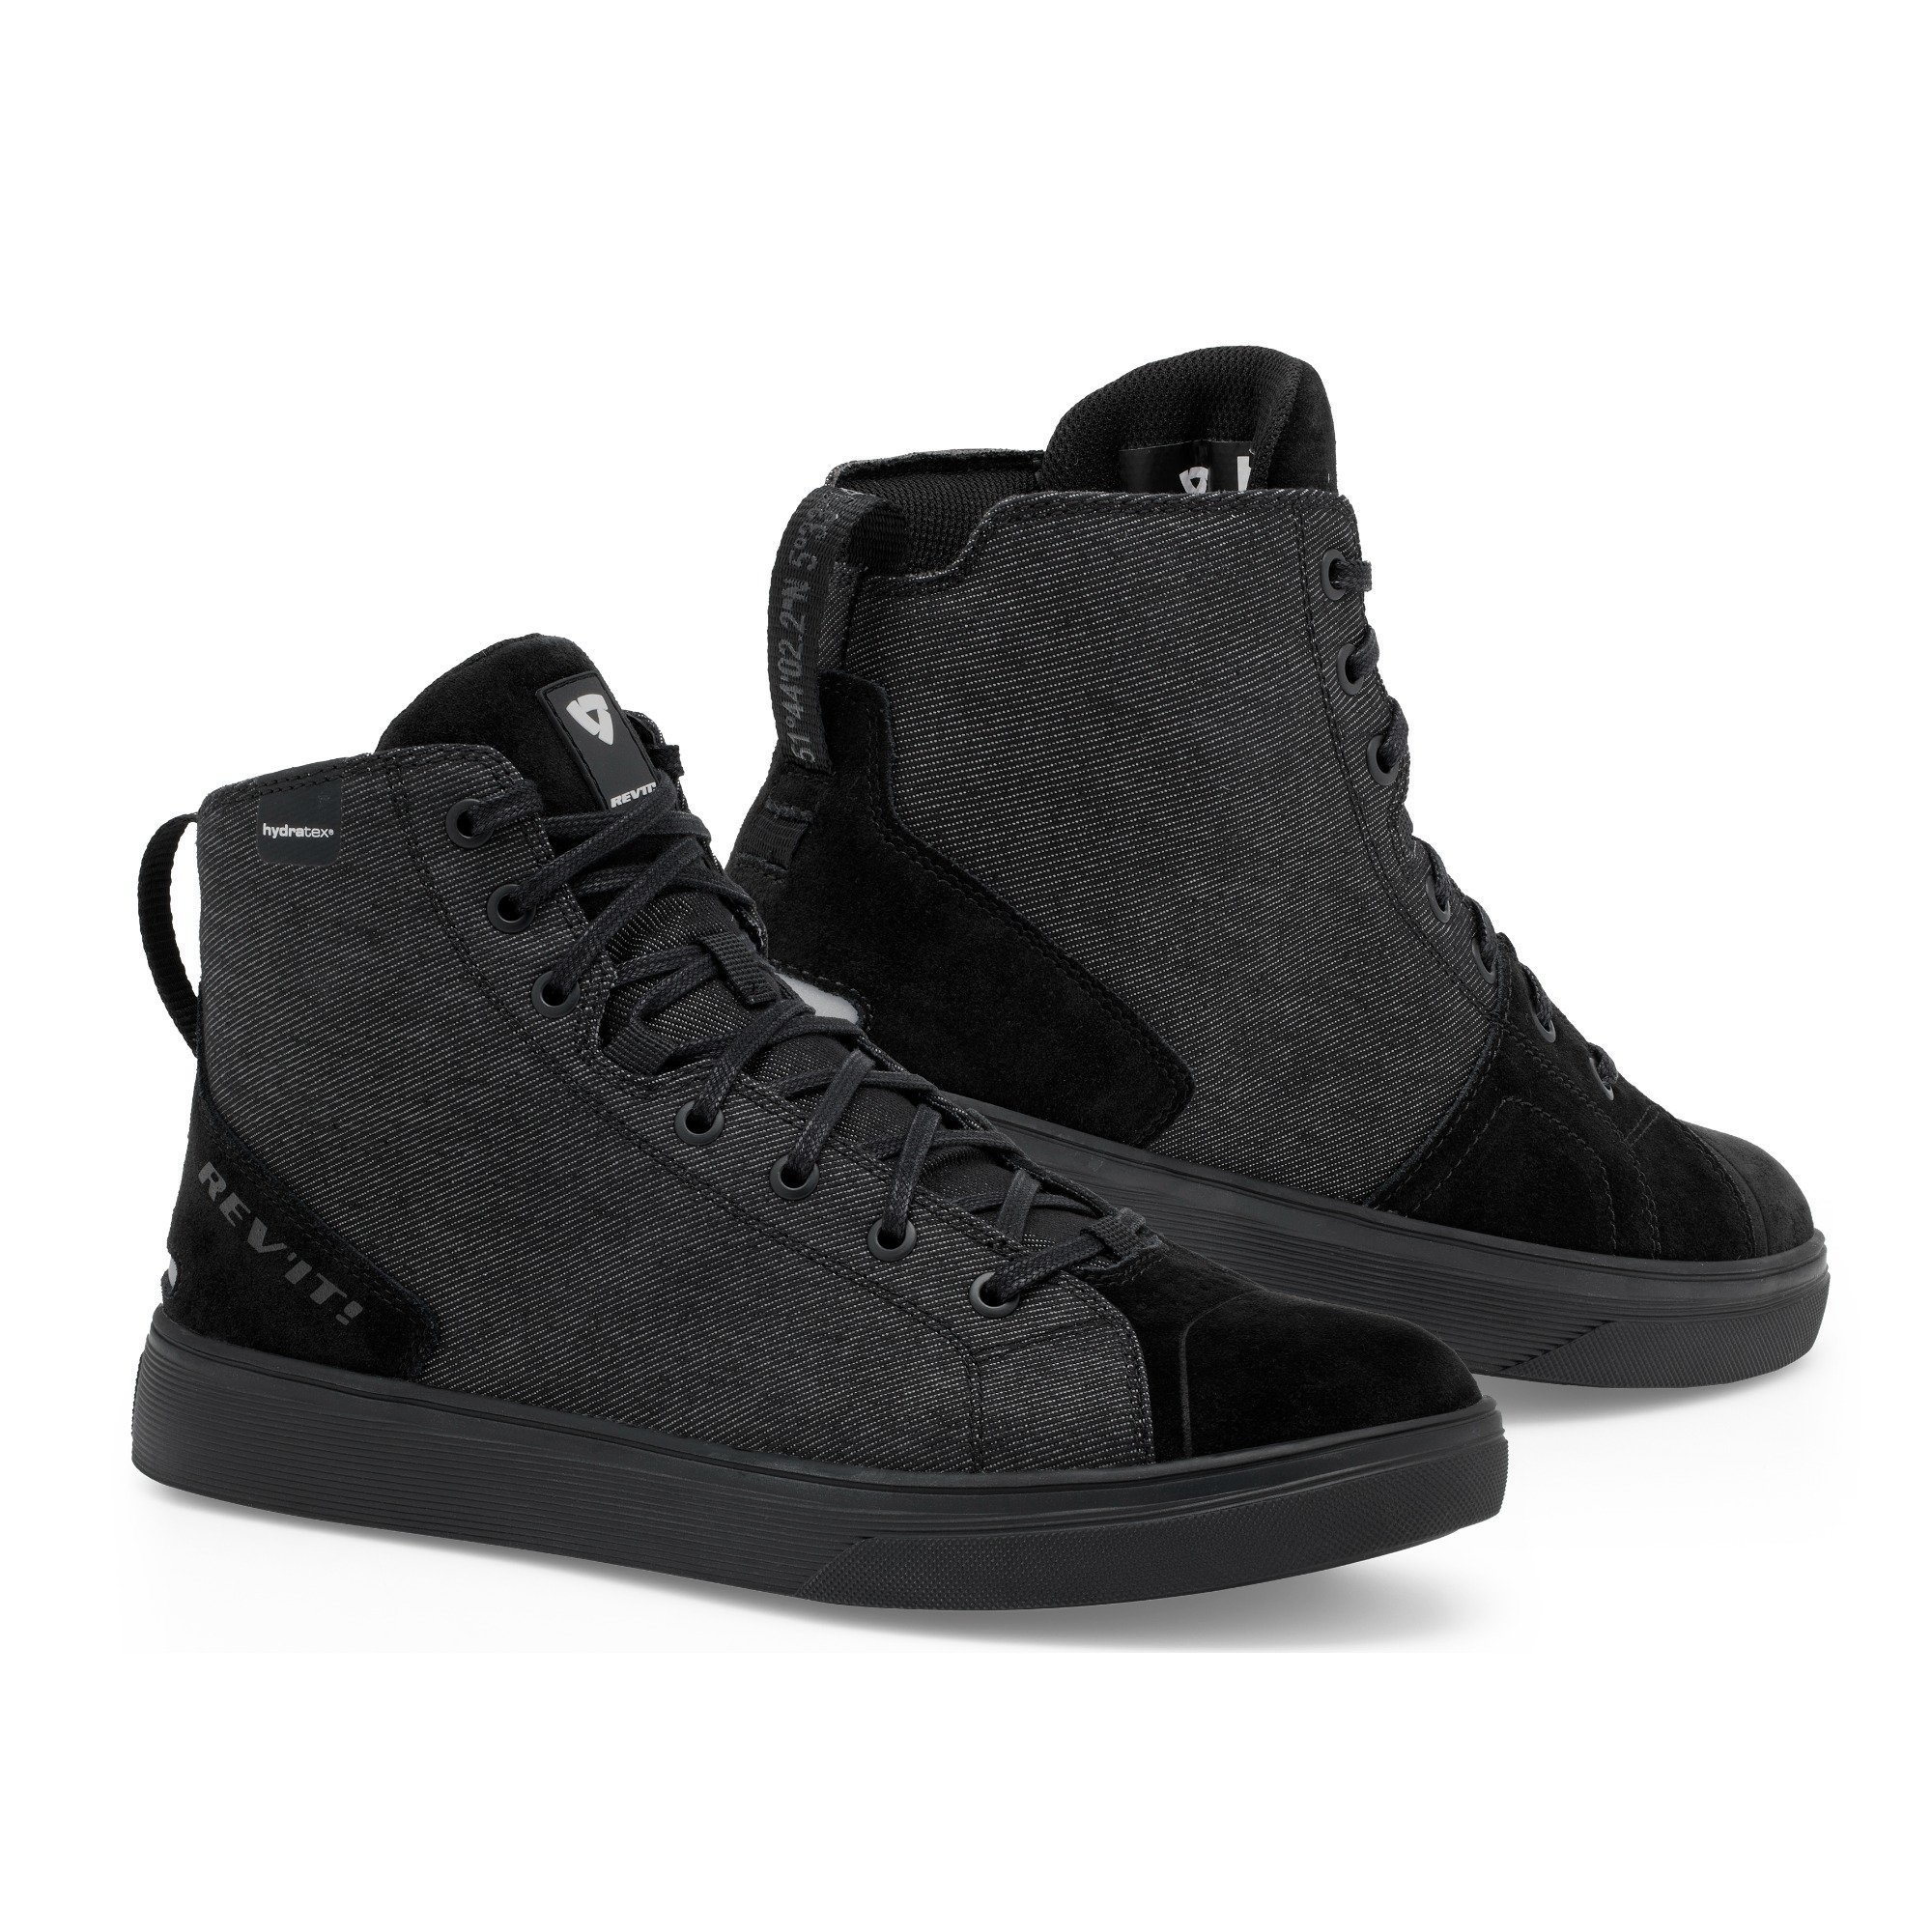 Image of REV'IT! Delta H2O Shoes Black Size 42 ID 8700001356367